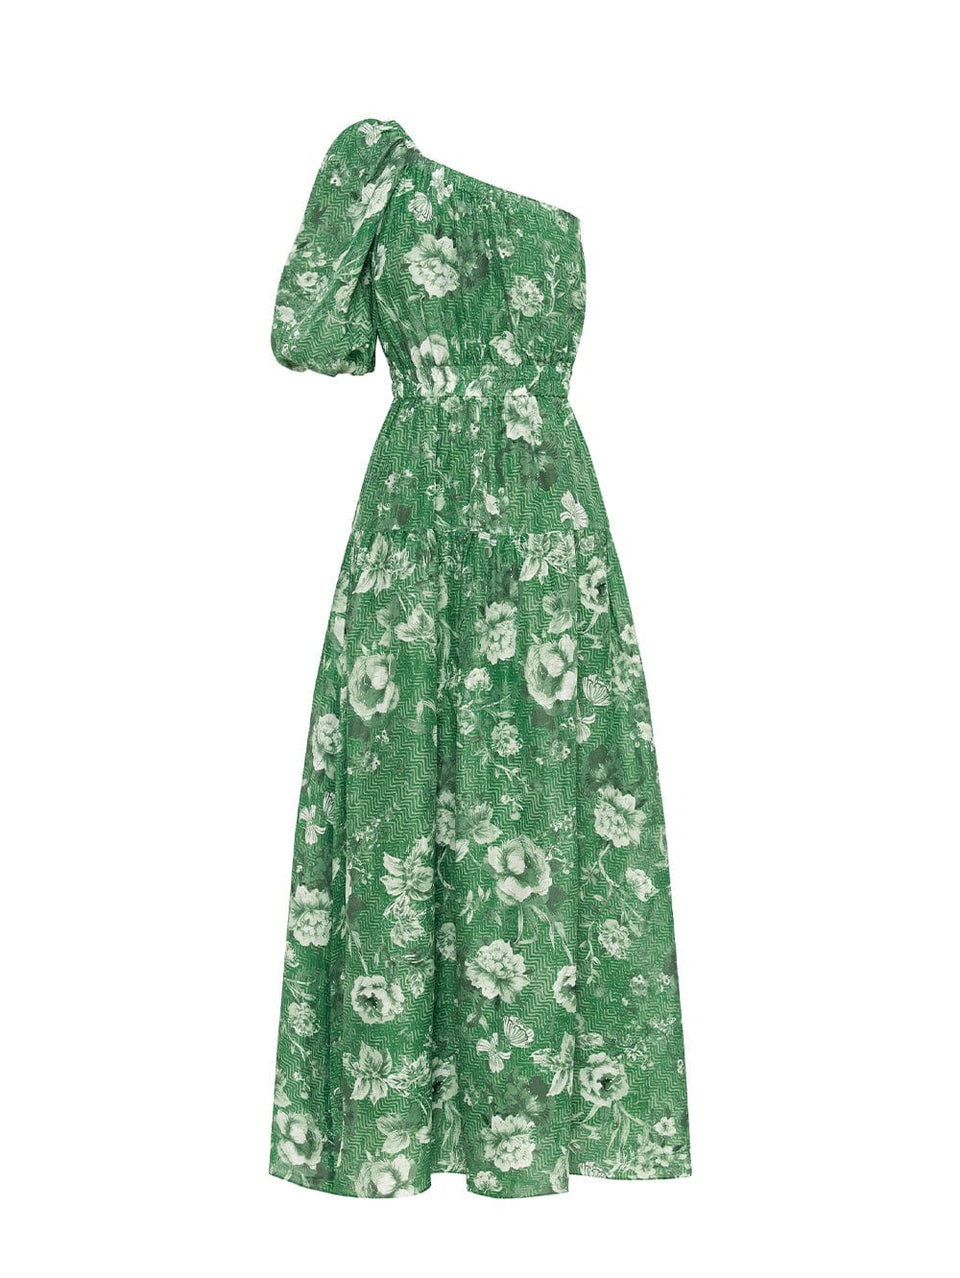 Ghost image of KIVARI Khalo Maxi Dress: A green floral one-shoulder dress with a short sleeve, elasticated front and waist, and tiered skirt.